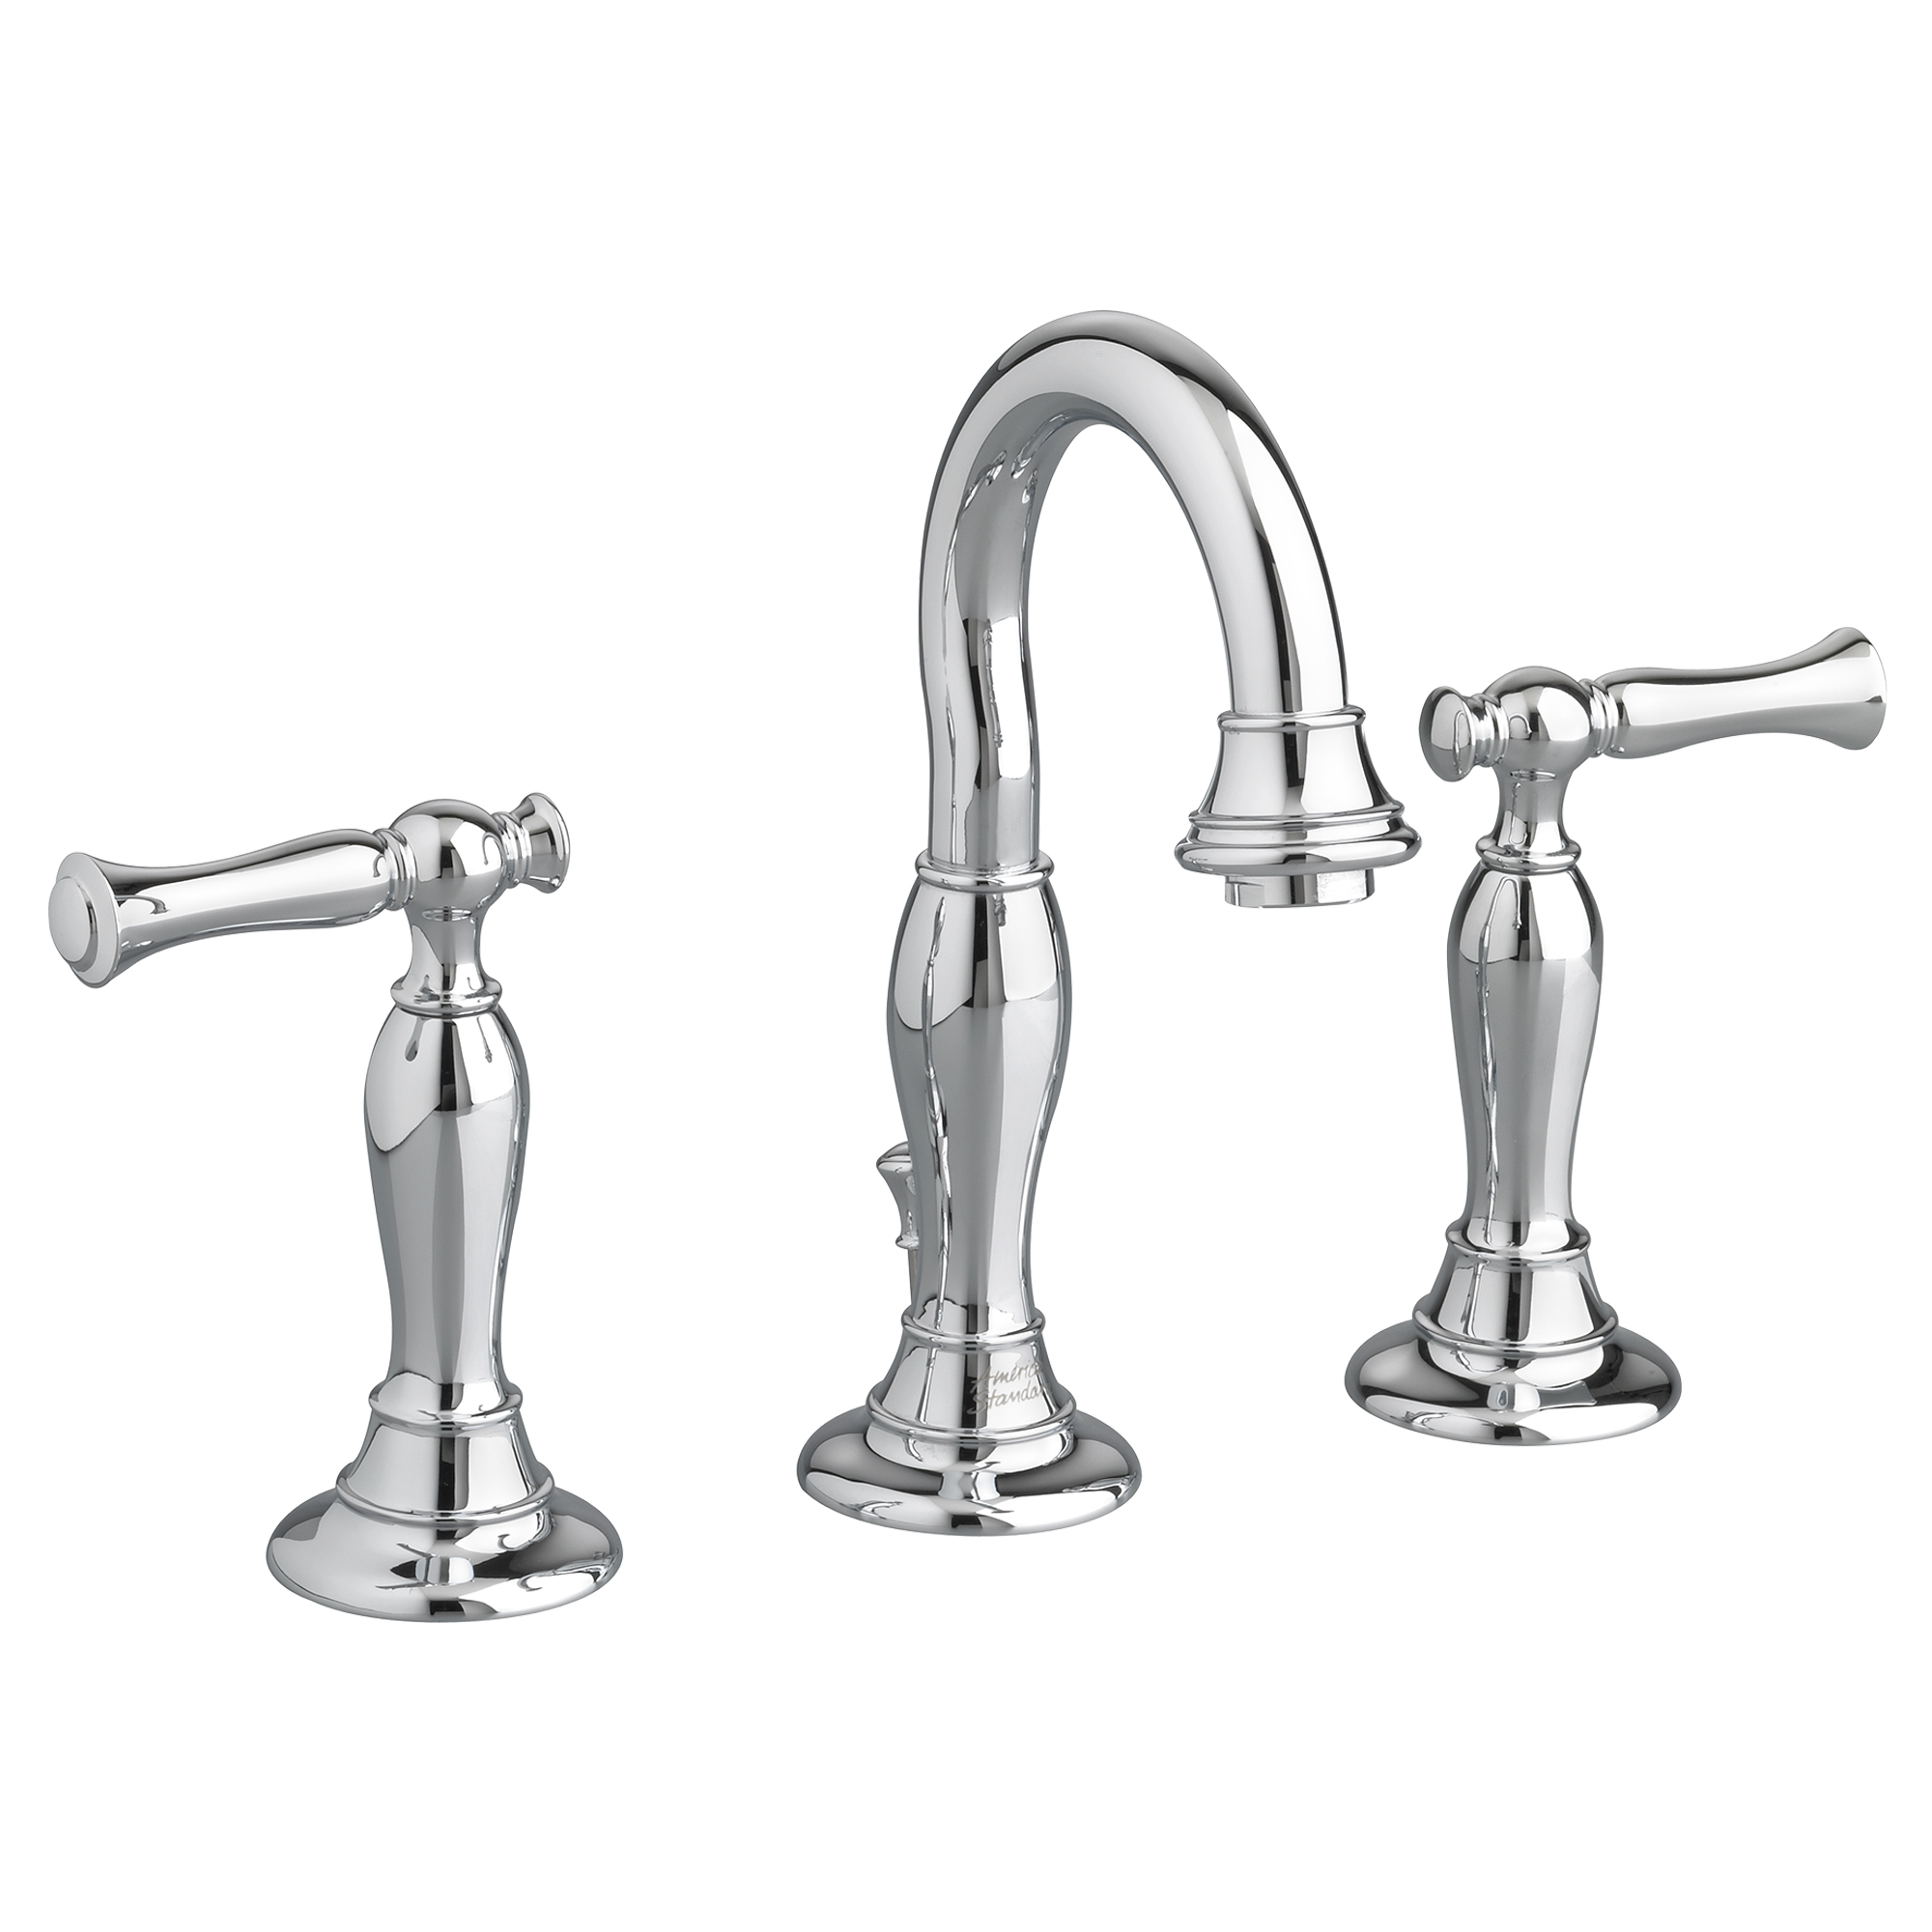 Quentin™ 8-Inch Widespread 2-Handle Bathroom Faucet 1.2 gpm/4.5 L/min With Lever Handles